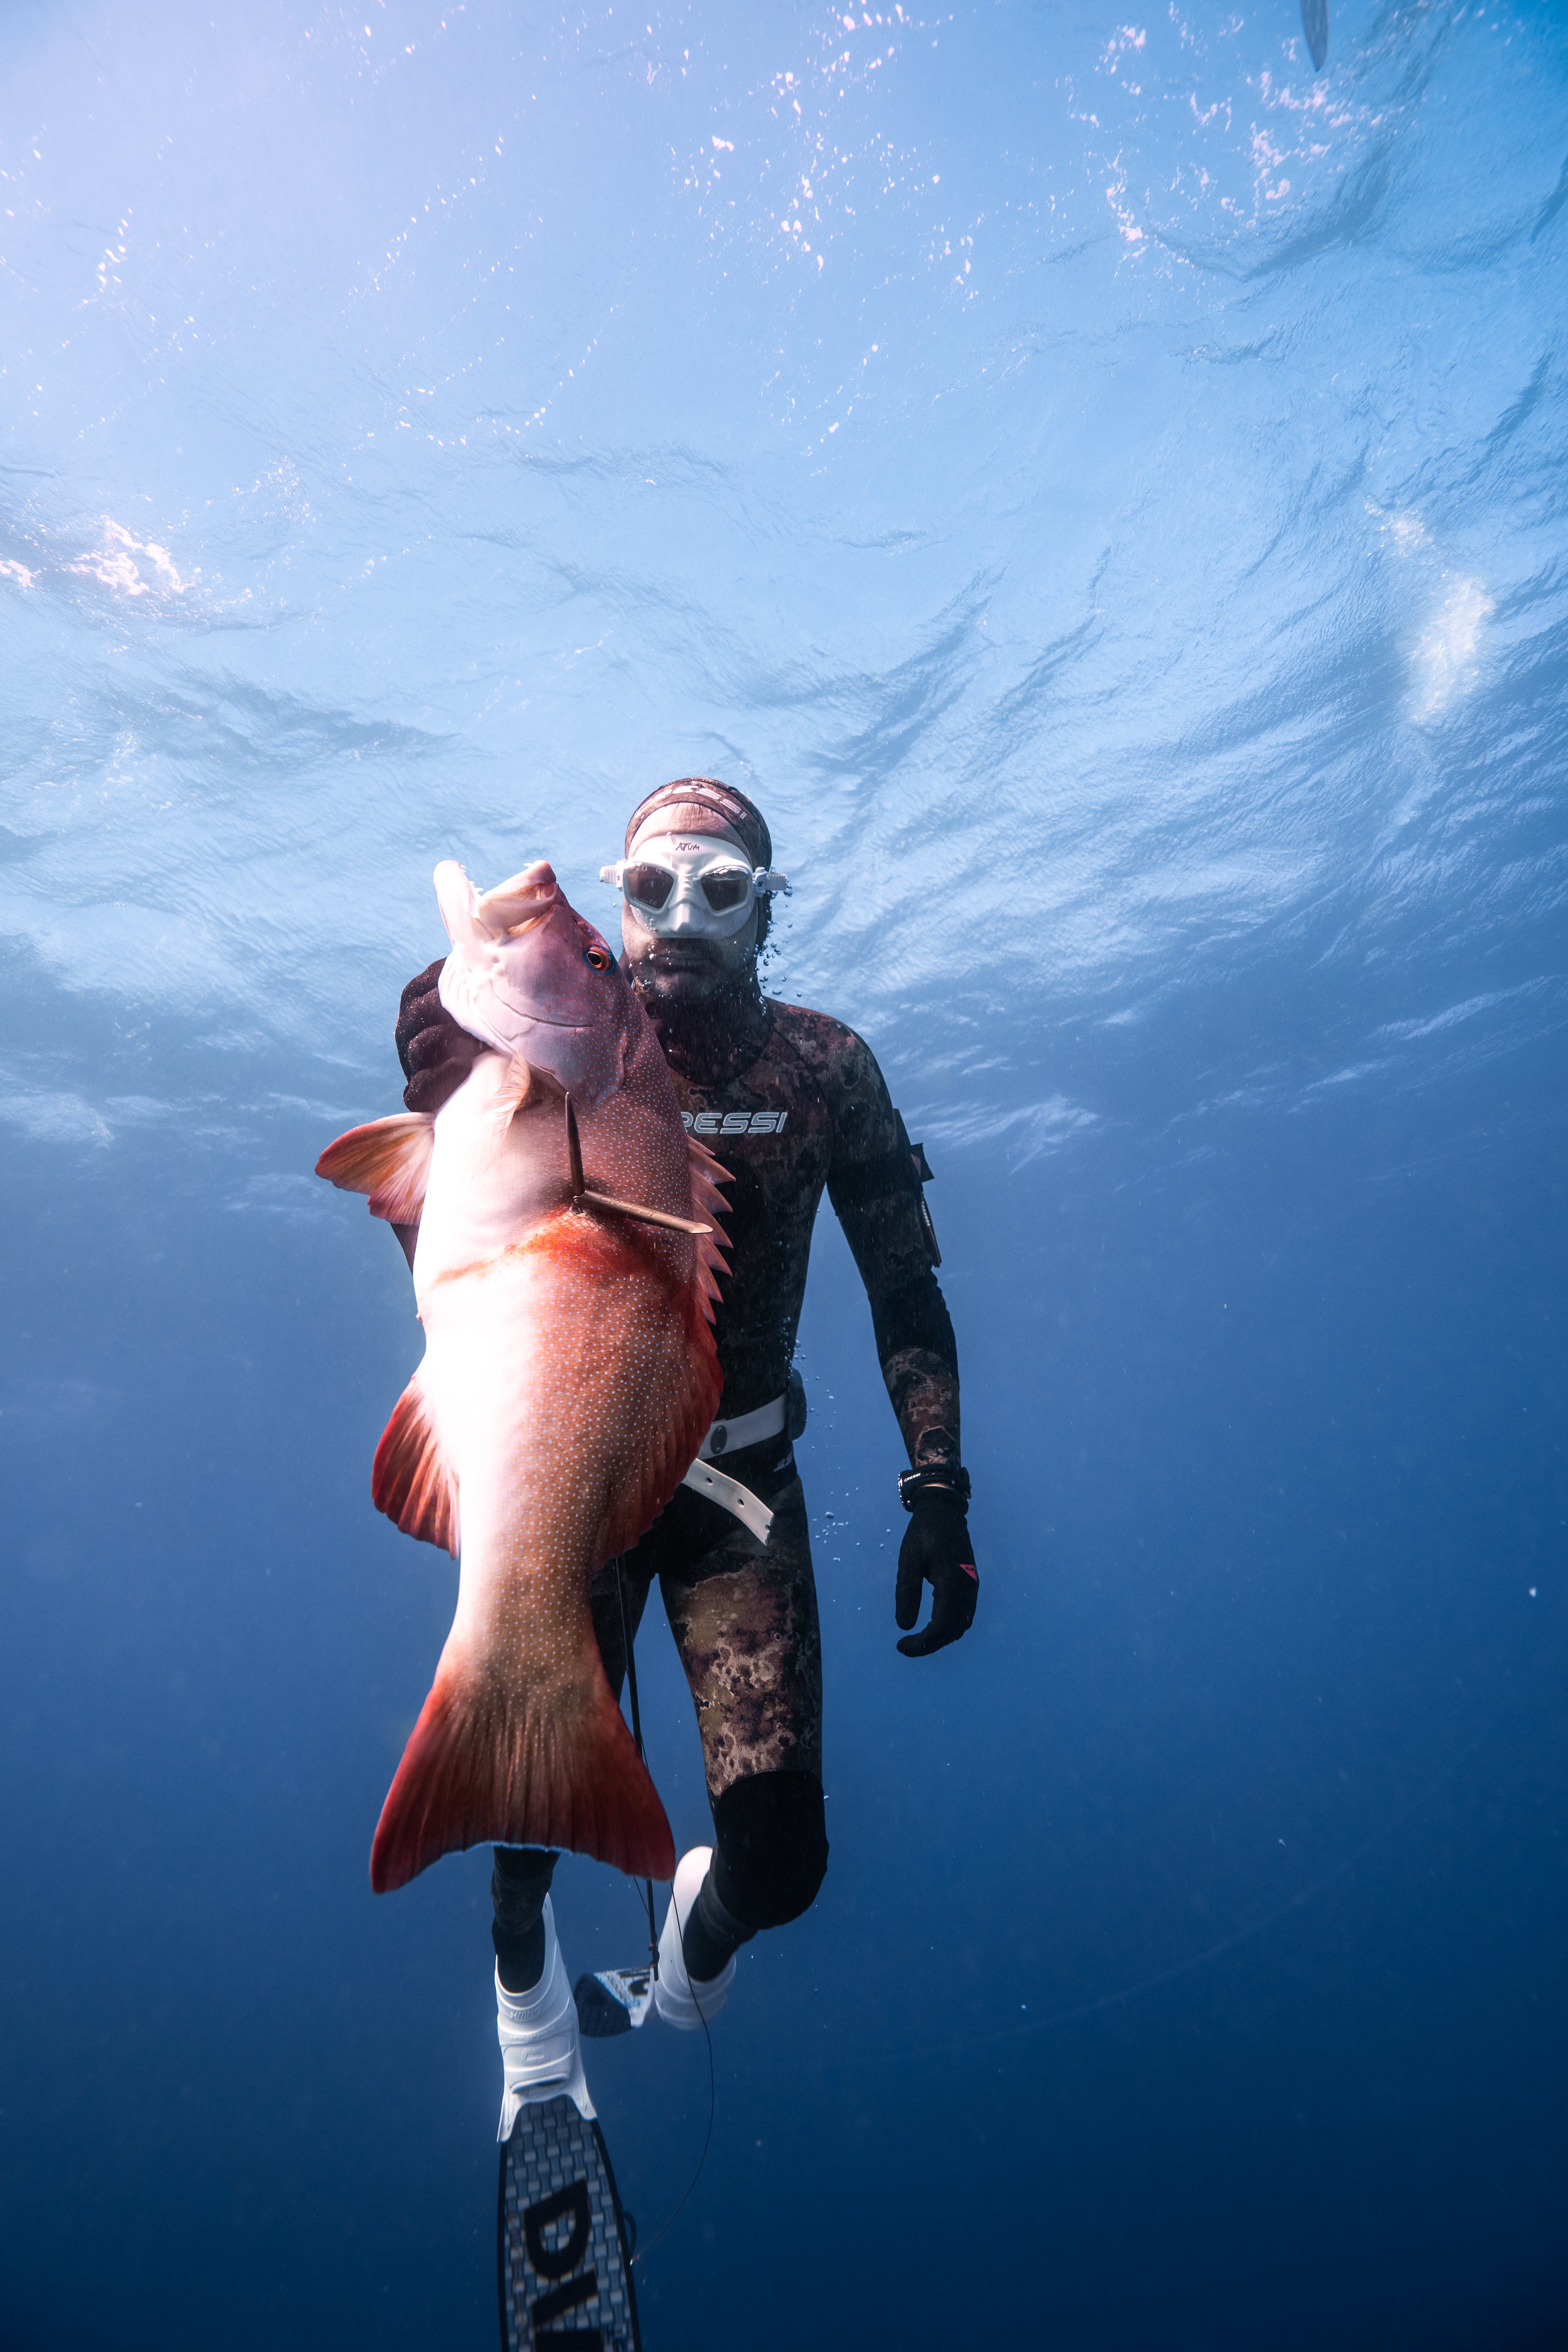 Interested in starting spearfishing but unsure where to start